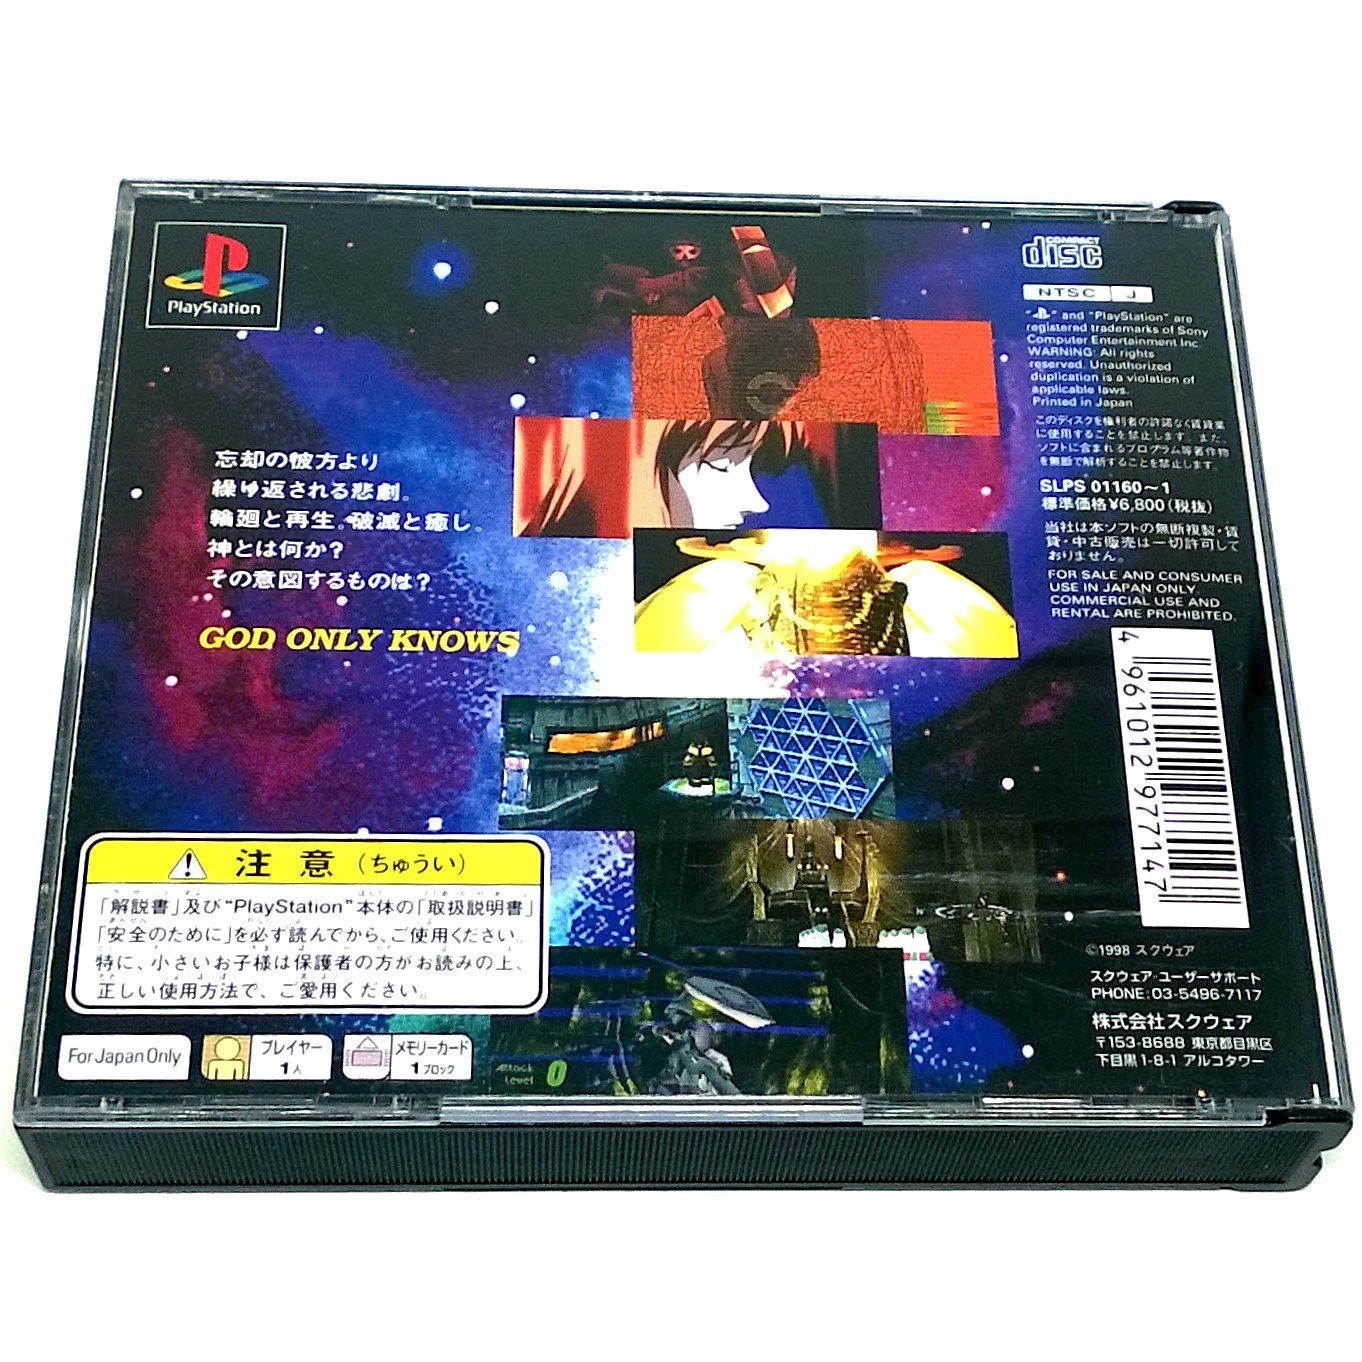 Xenogears for PlayStation (Import) - Back of case